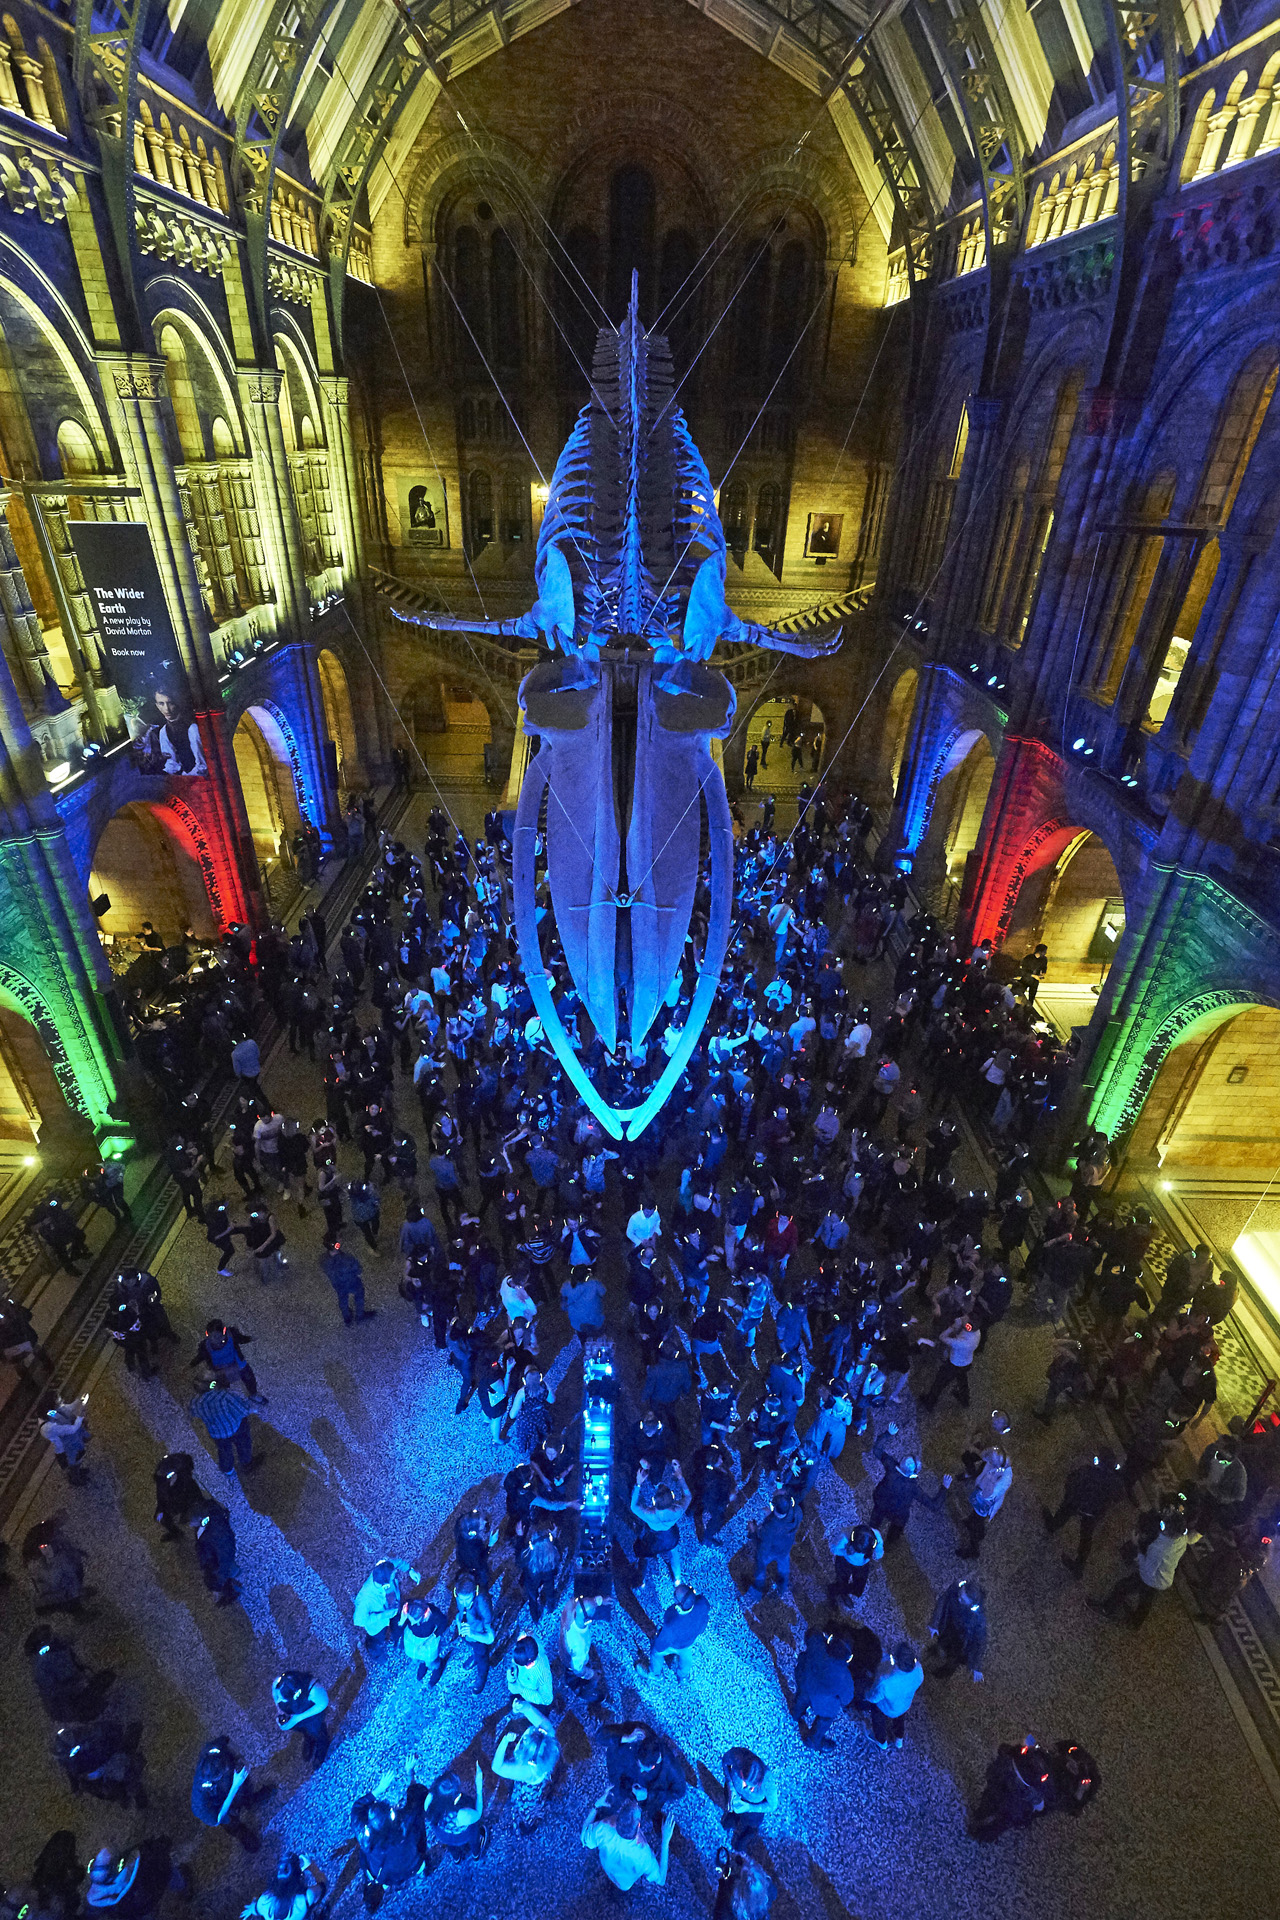 People partying beneath the whale skeleton with colourful lighting